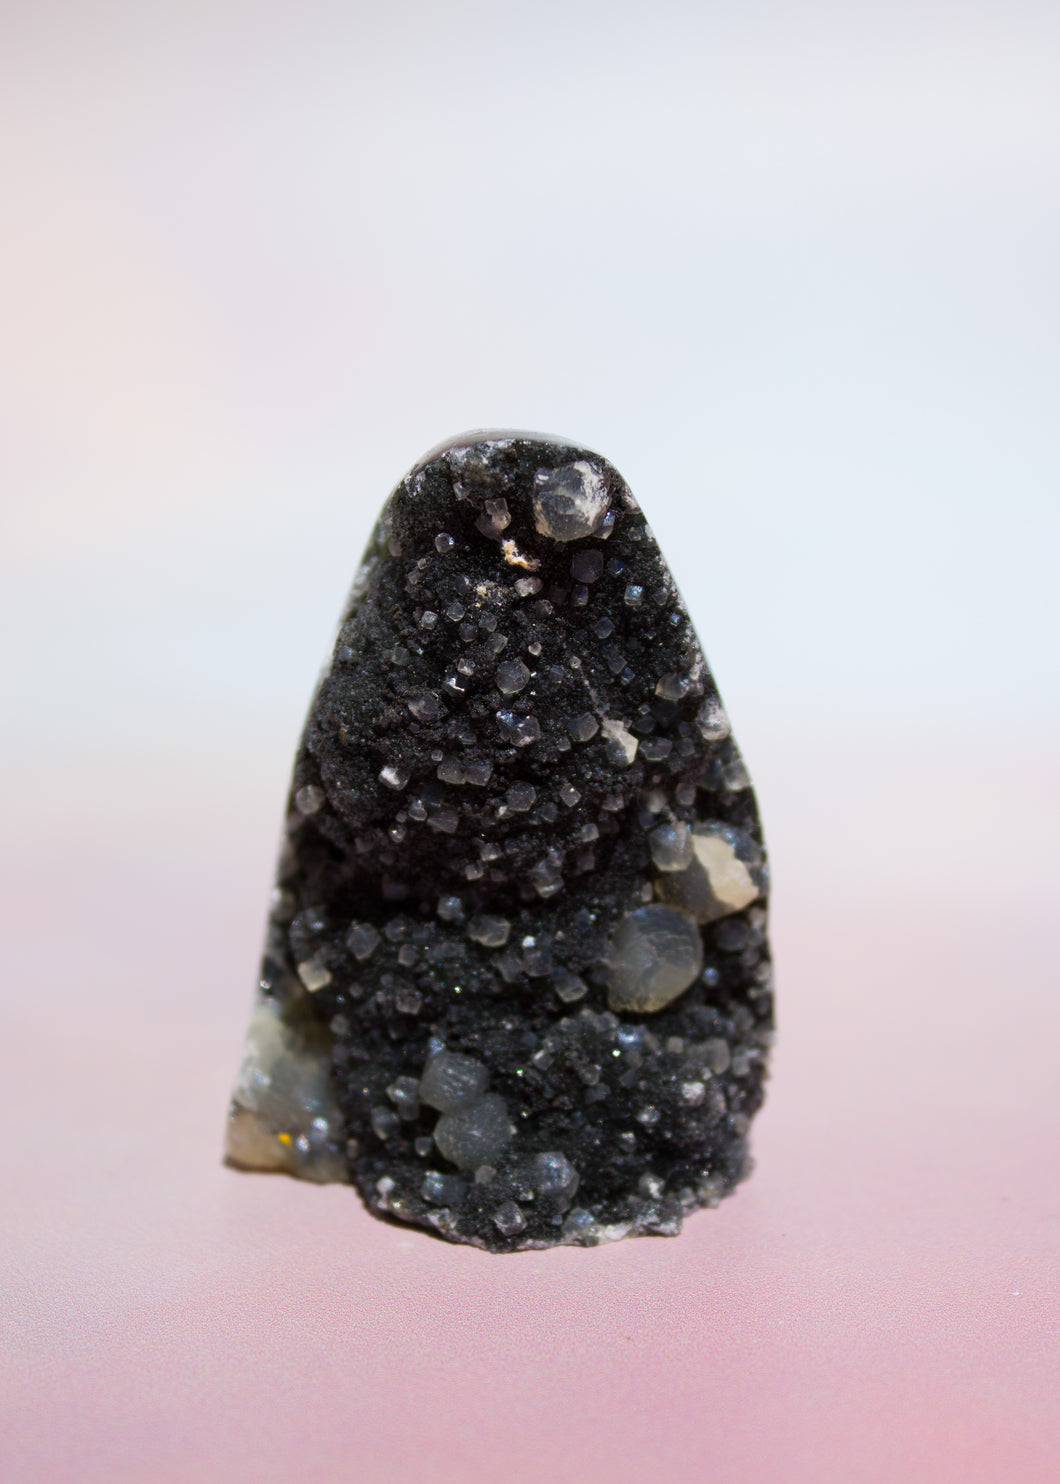 Black Amethyst Cutbase With Calcite Formations